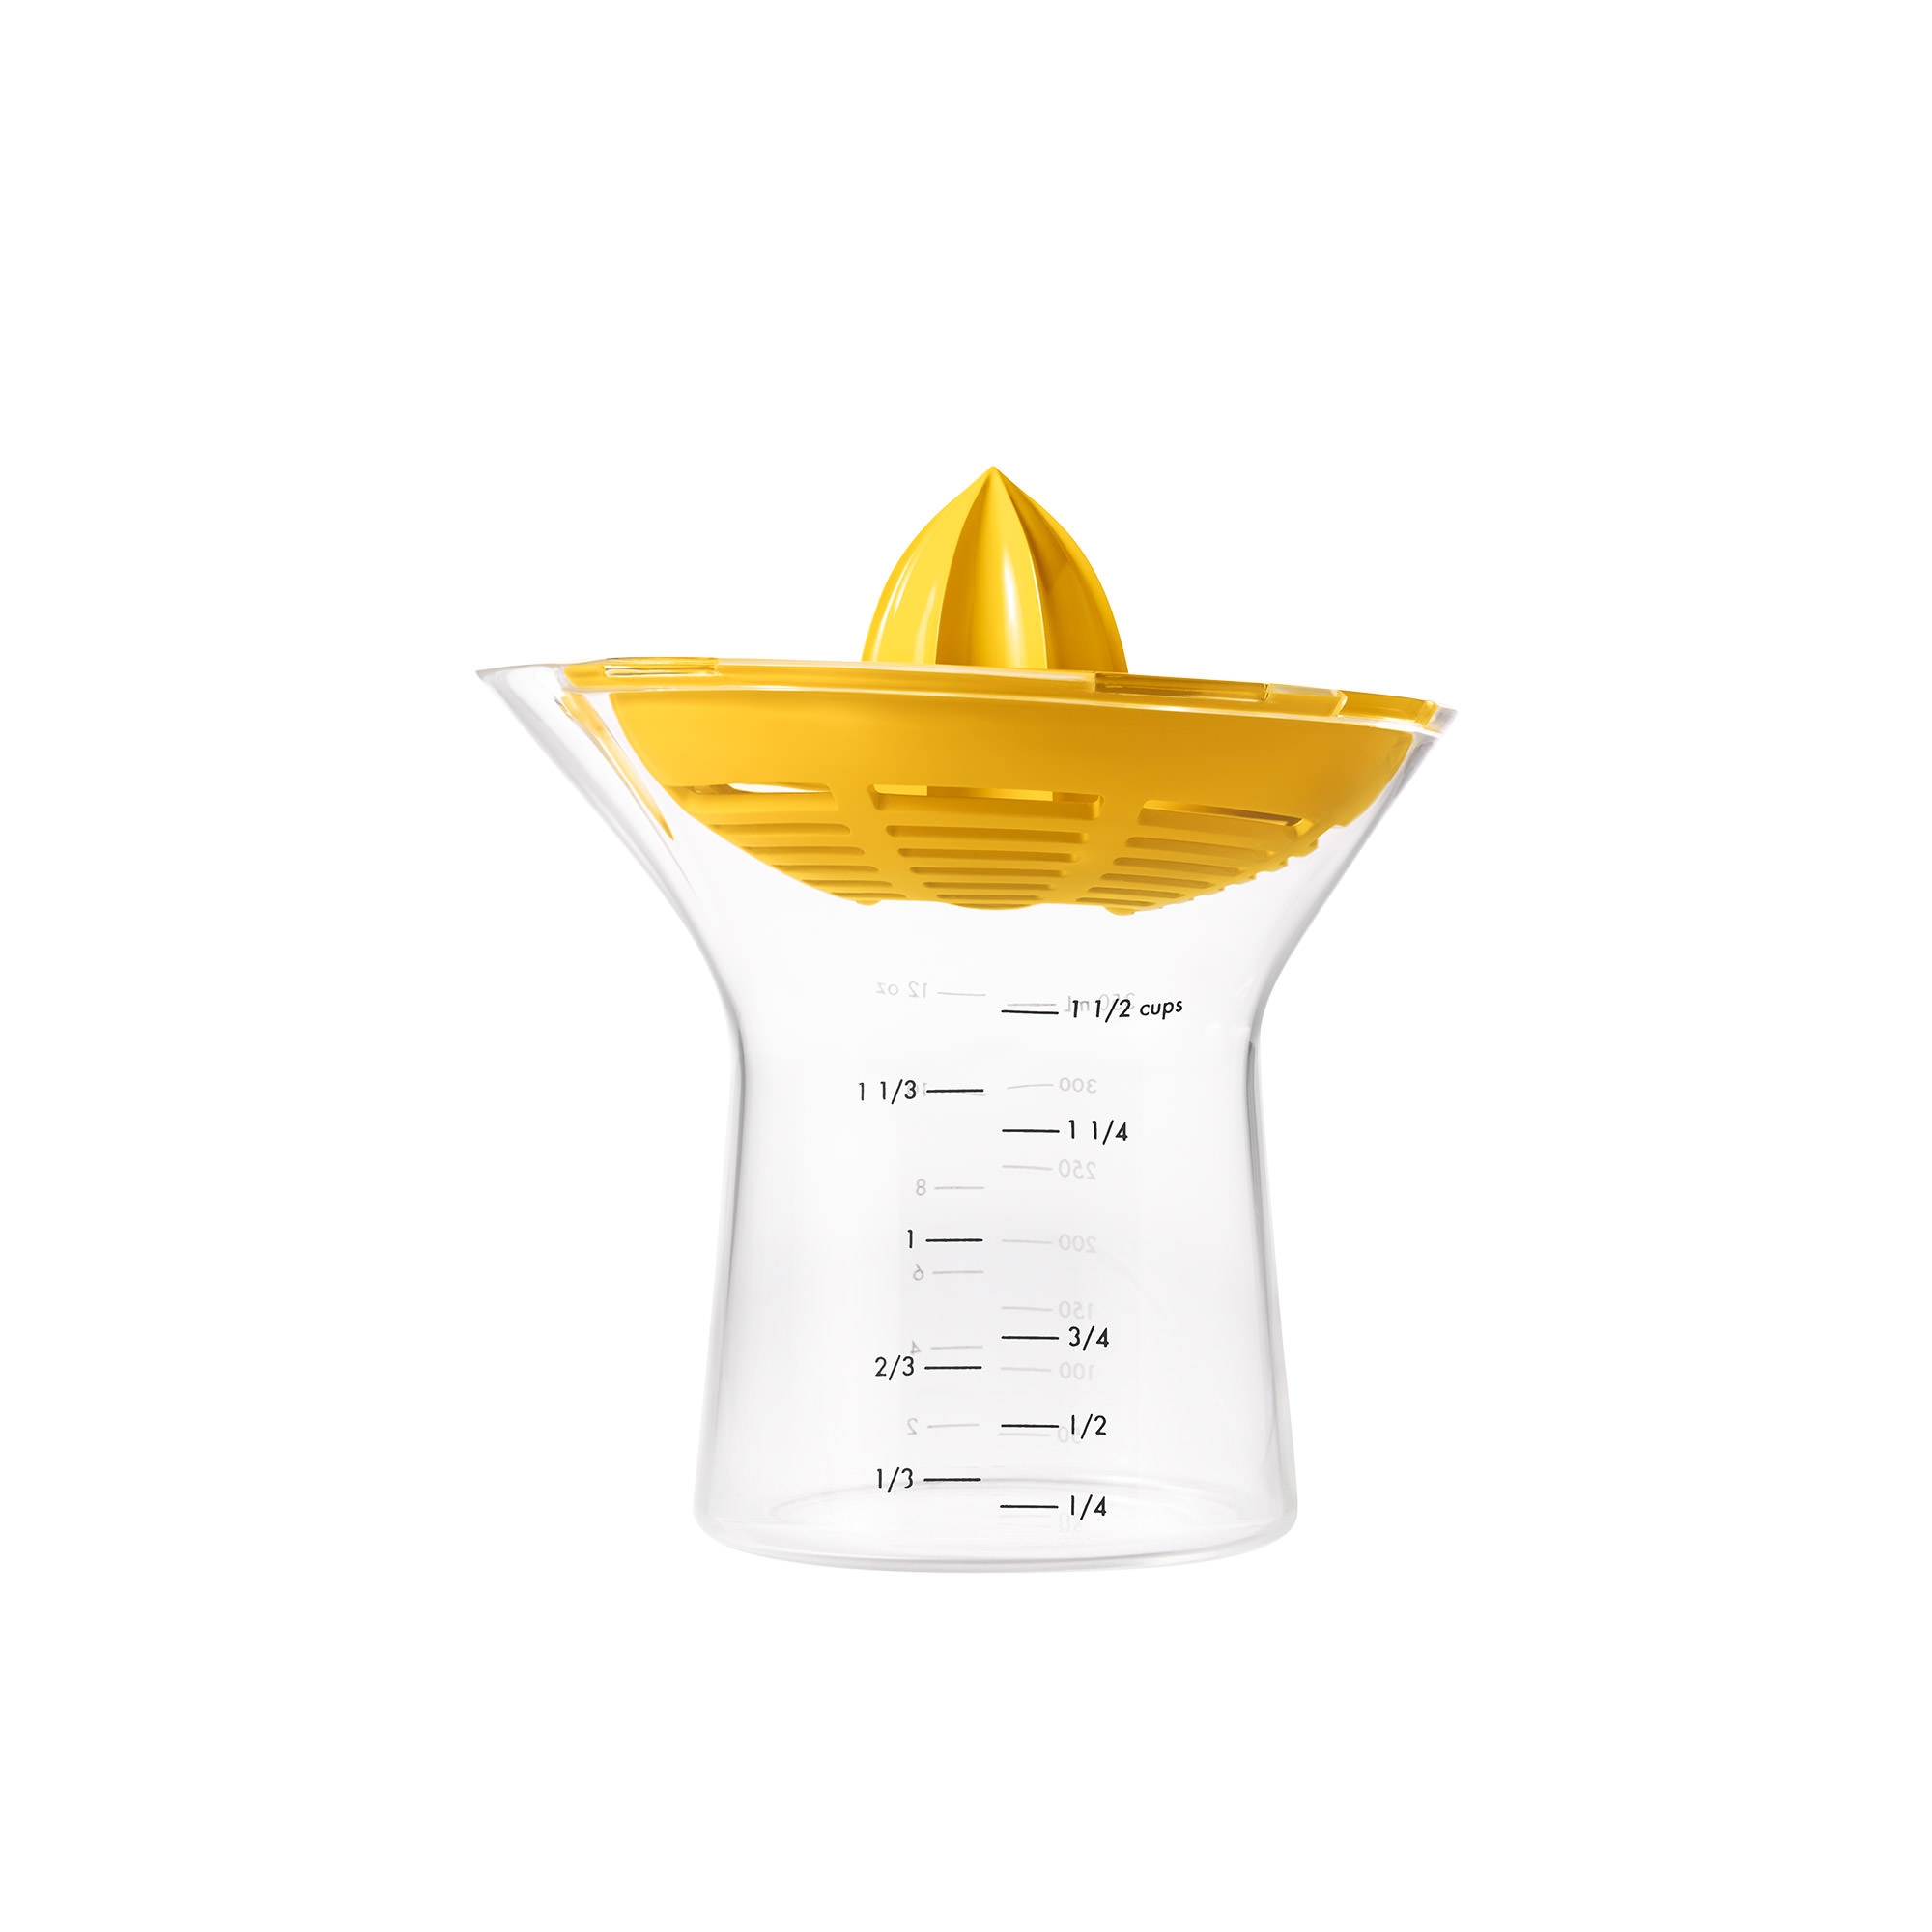 OXO Good Grips 2 in 1 Citrus Juicer Image 2